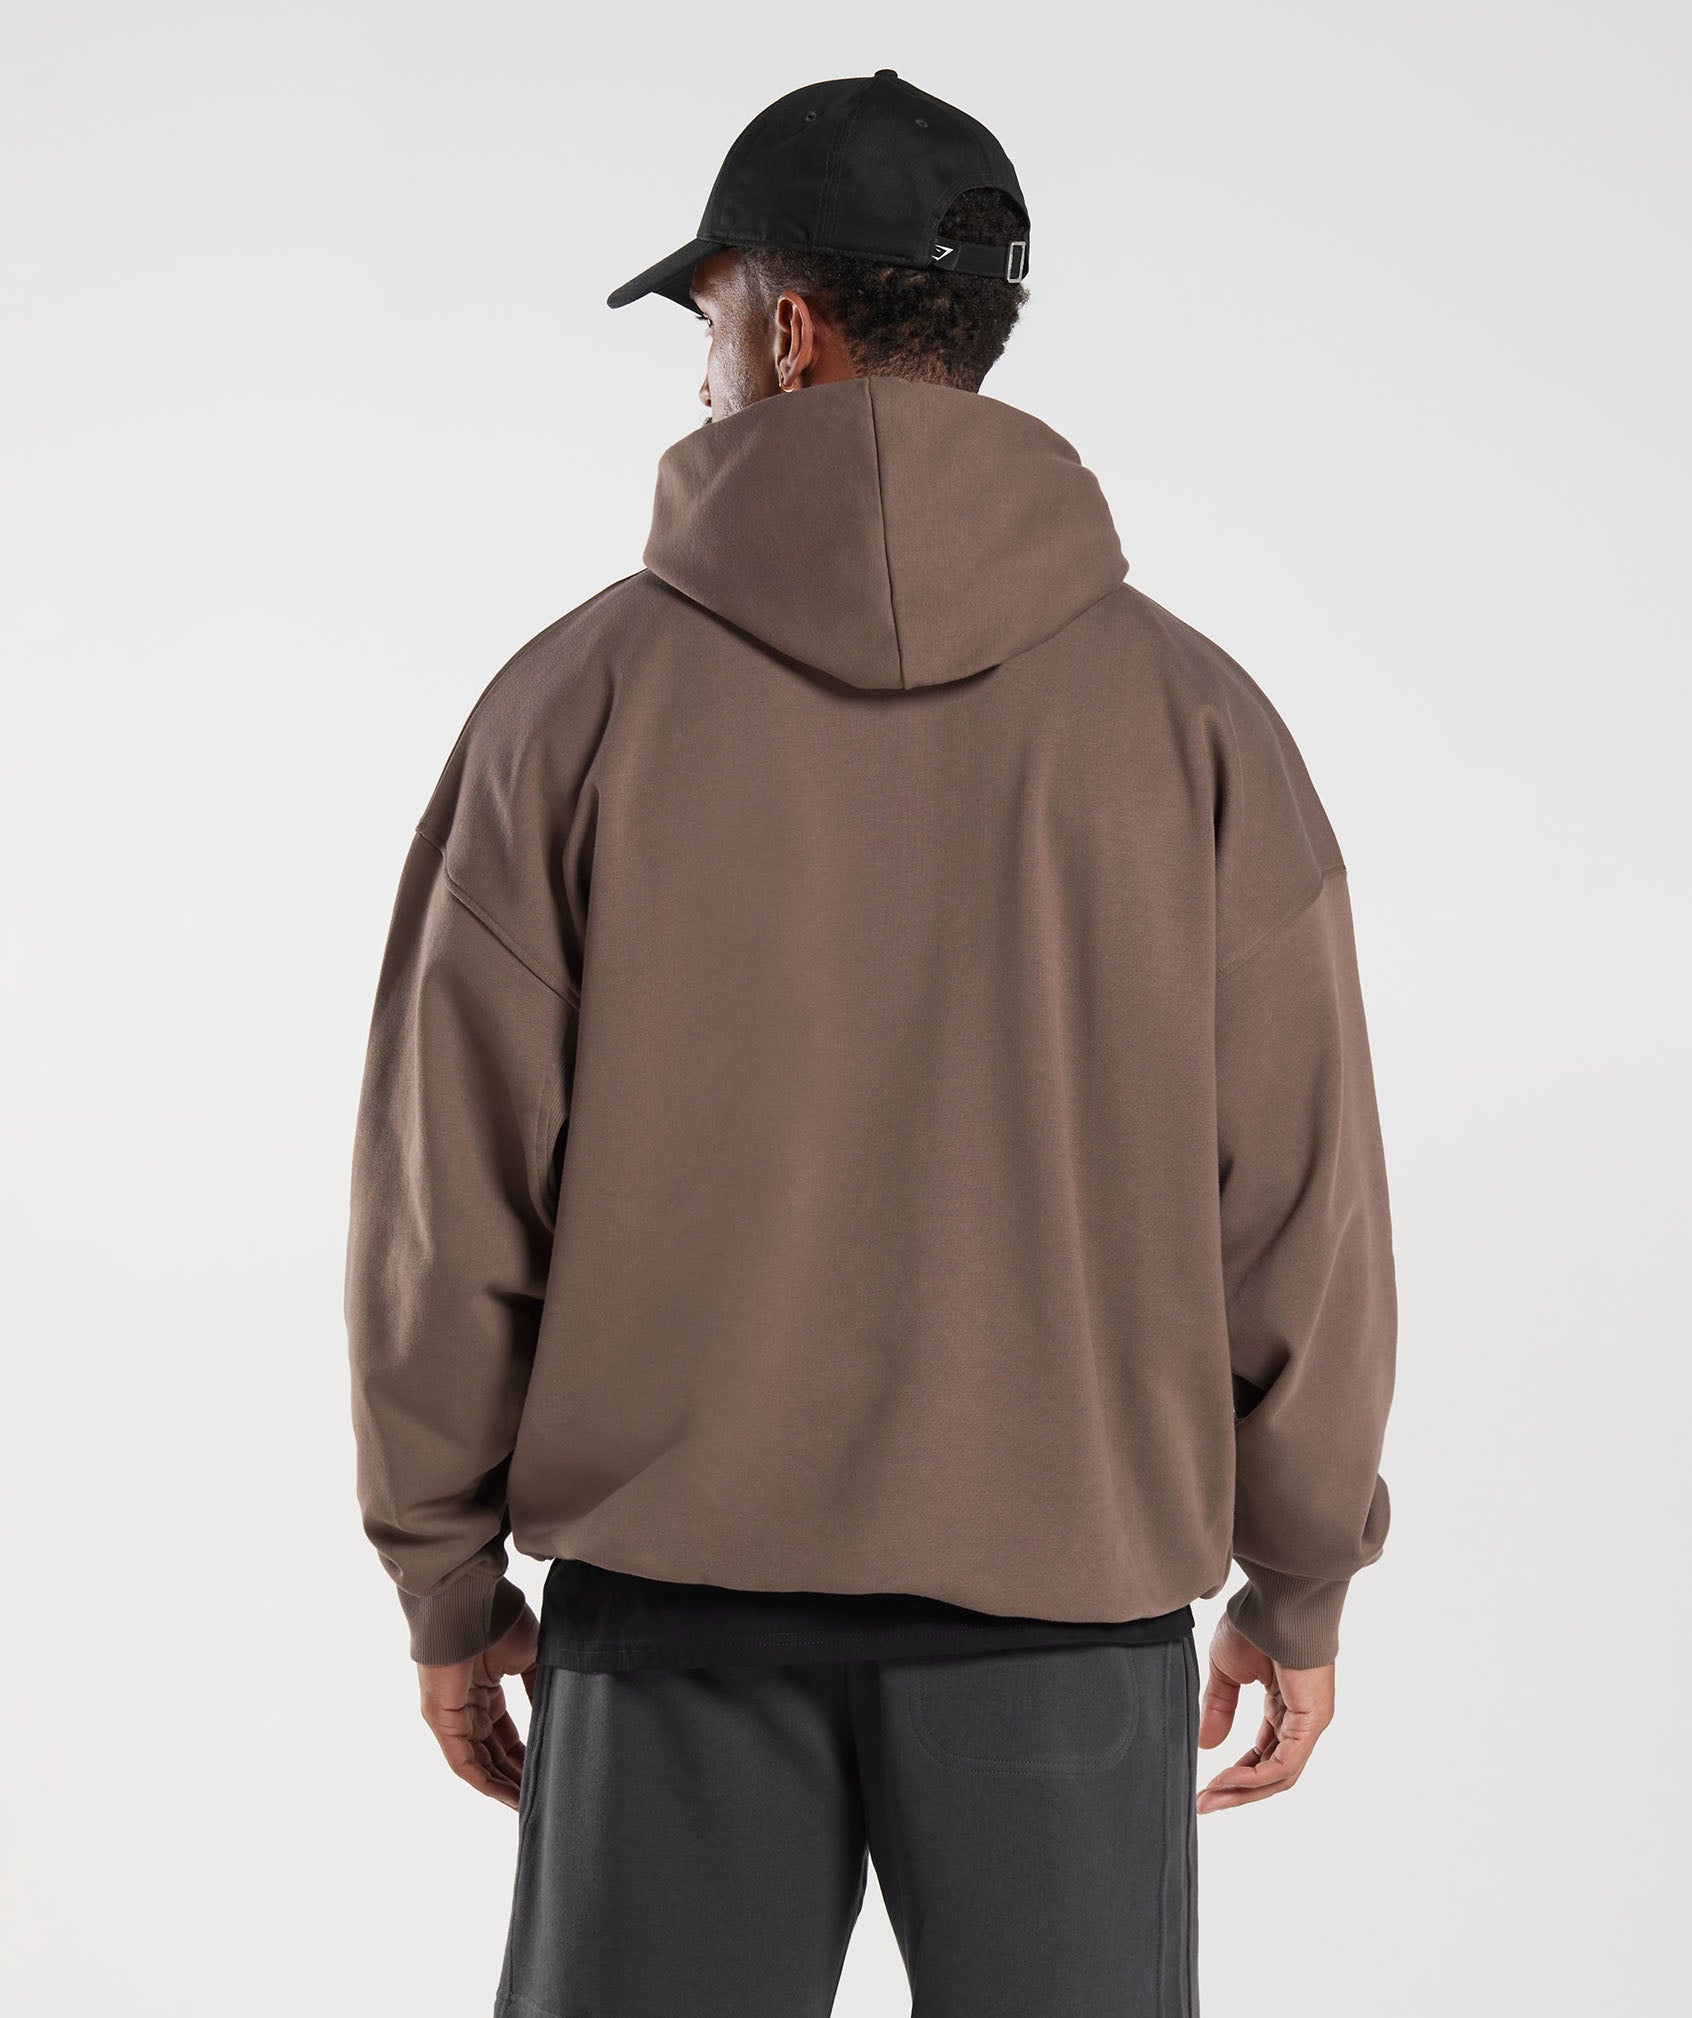 Rest Day Essentials Hoodie in Truffle Brown - view 2